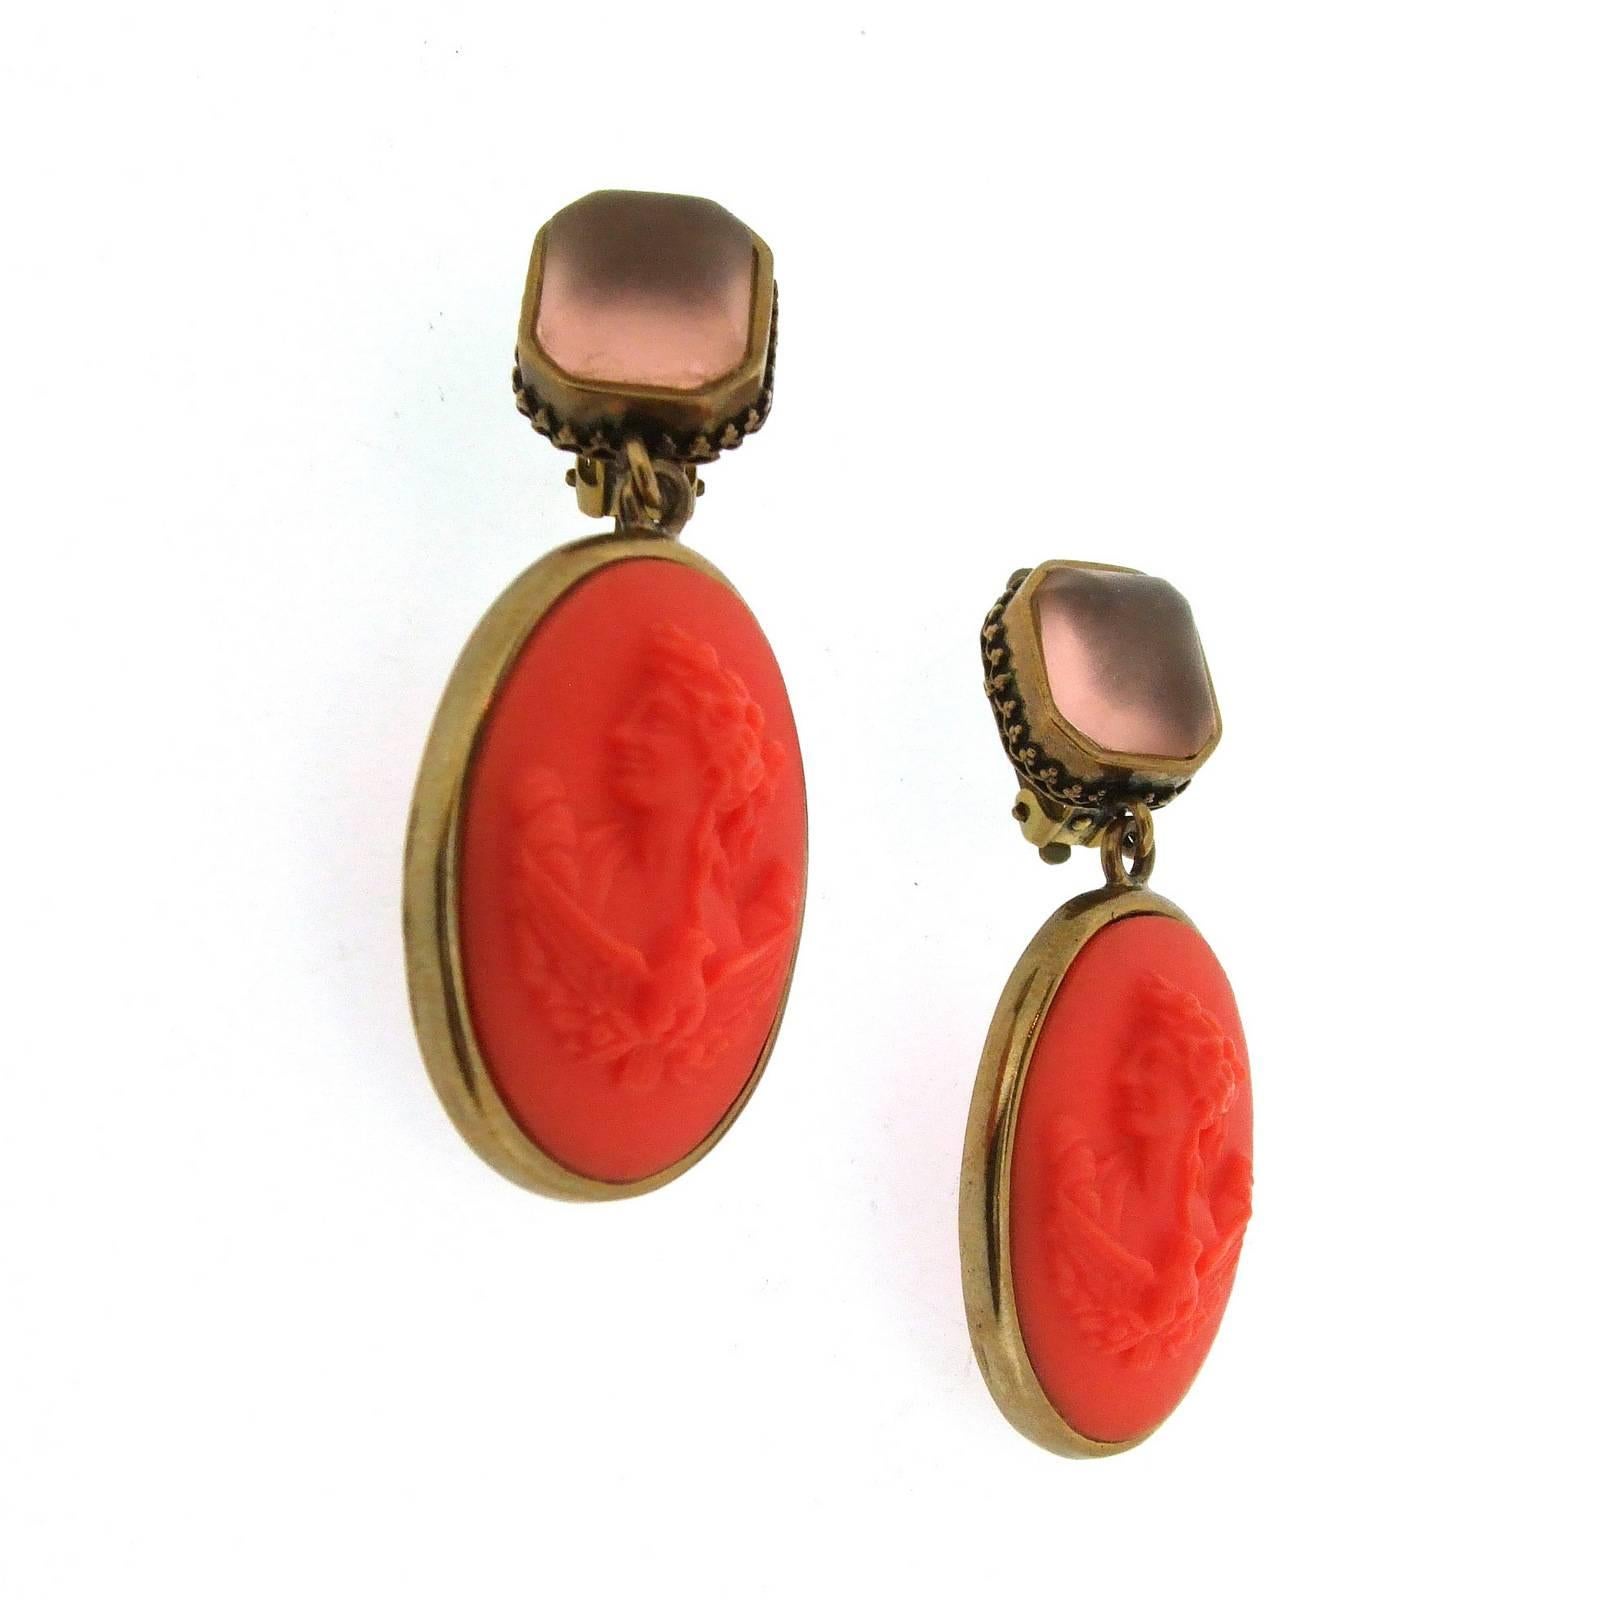 A pair of two part clip on earrings, with a coral German glass cameo. Top is pale pink opaque glass. Cameo image is reproduced from Greco/Roman mythology.

They measure: 5.1cm drop by 1.1cm wide at the top and 2.3cm wide at the bottom. 